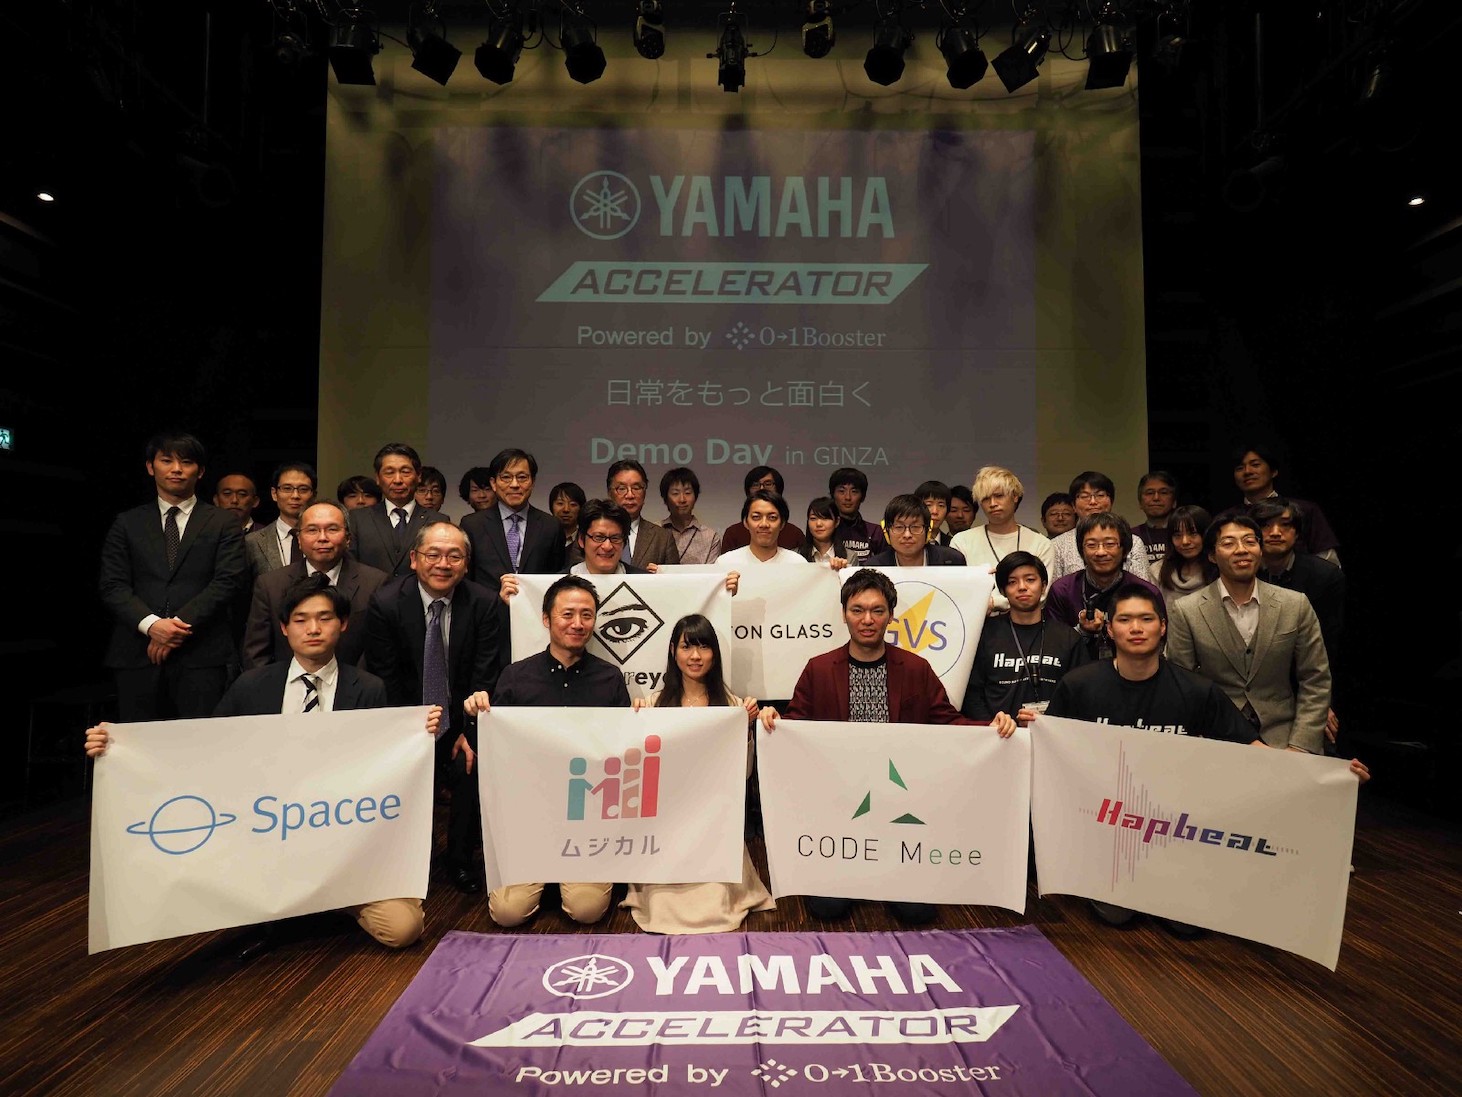 Group photo of Yamaha Accelerator Demo Day participants